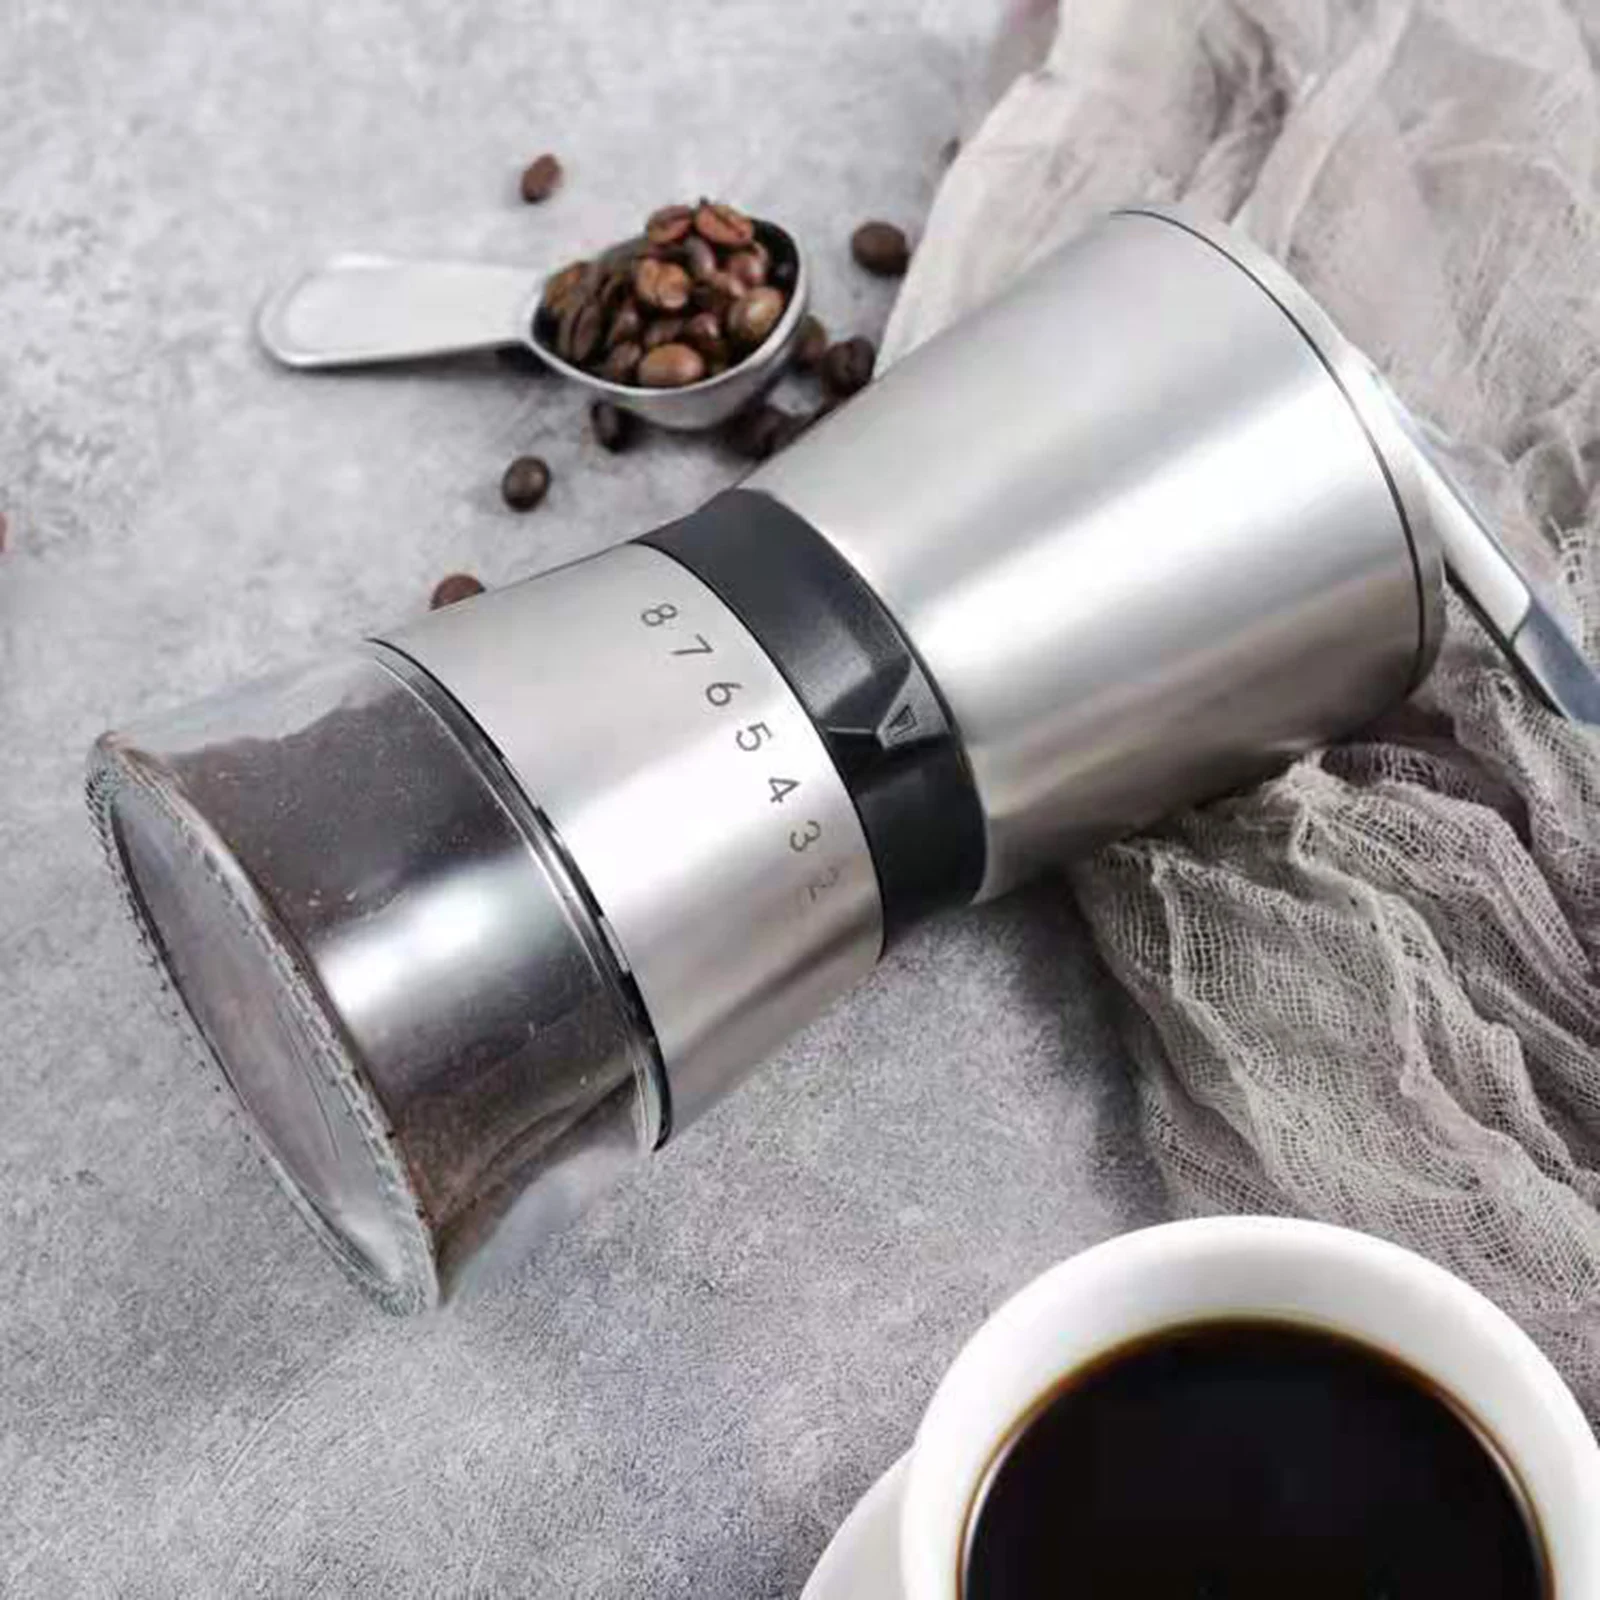 Durable Manual Coffee Grinder with Adjustable 8 Setting for Office Espresso